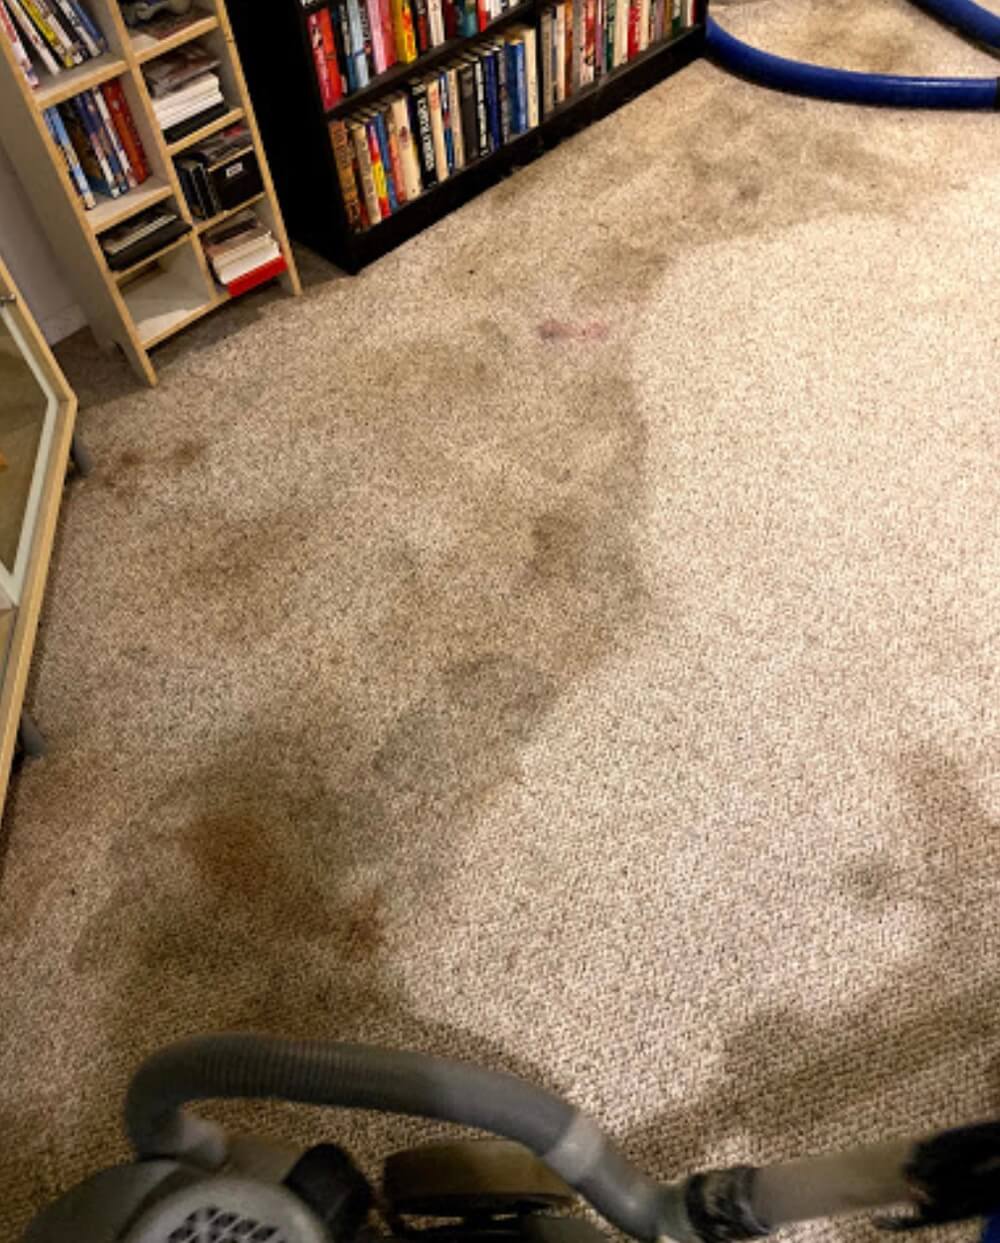 Before & After Carpet Cleaning